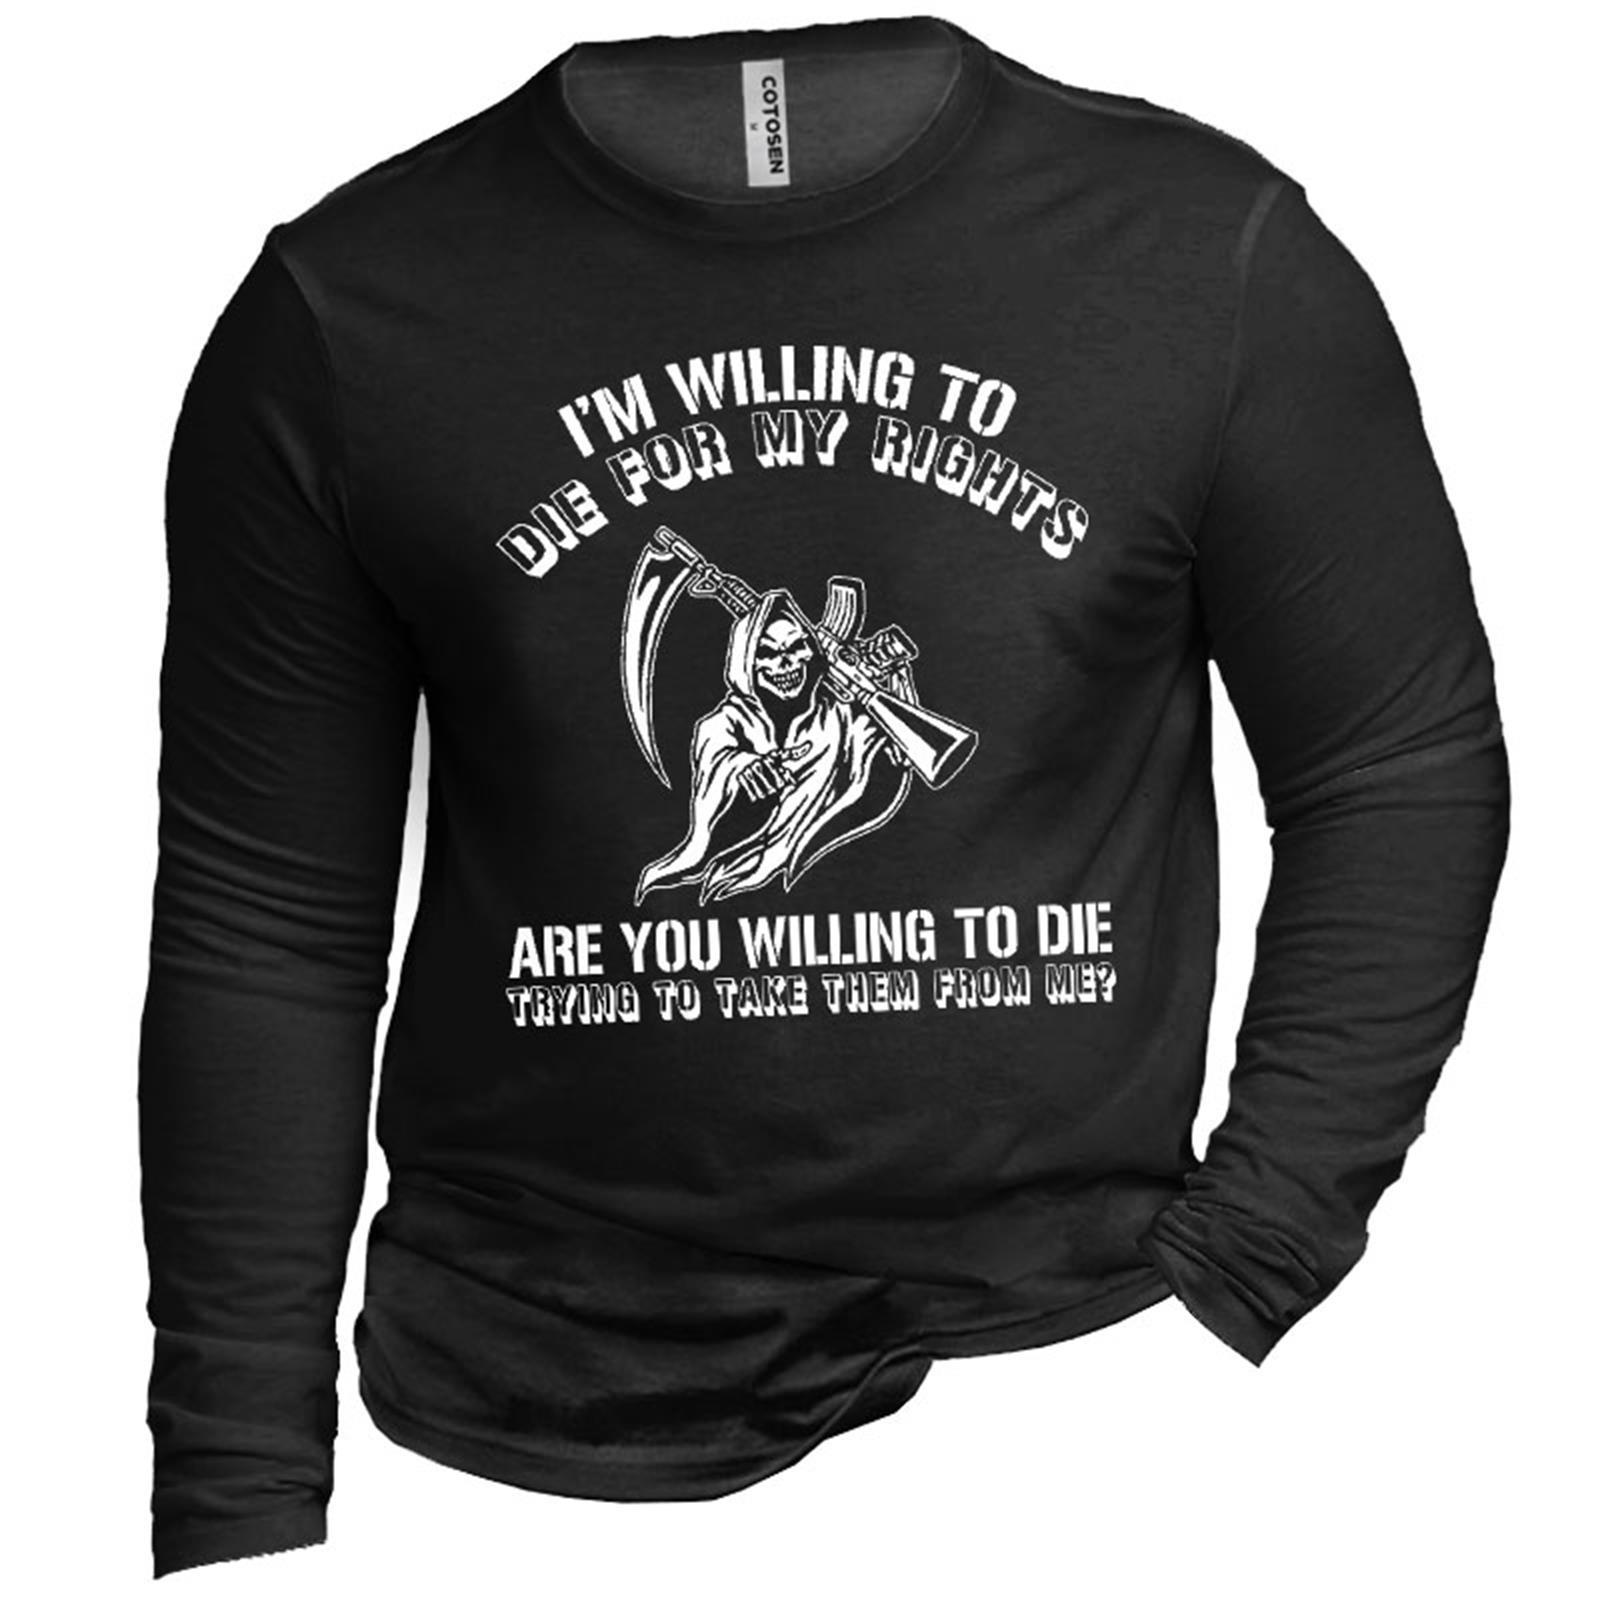 I'm Willing To Die Chic For My Rights Men's Cotton Long Sleeve T-shirt